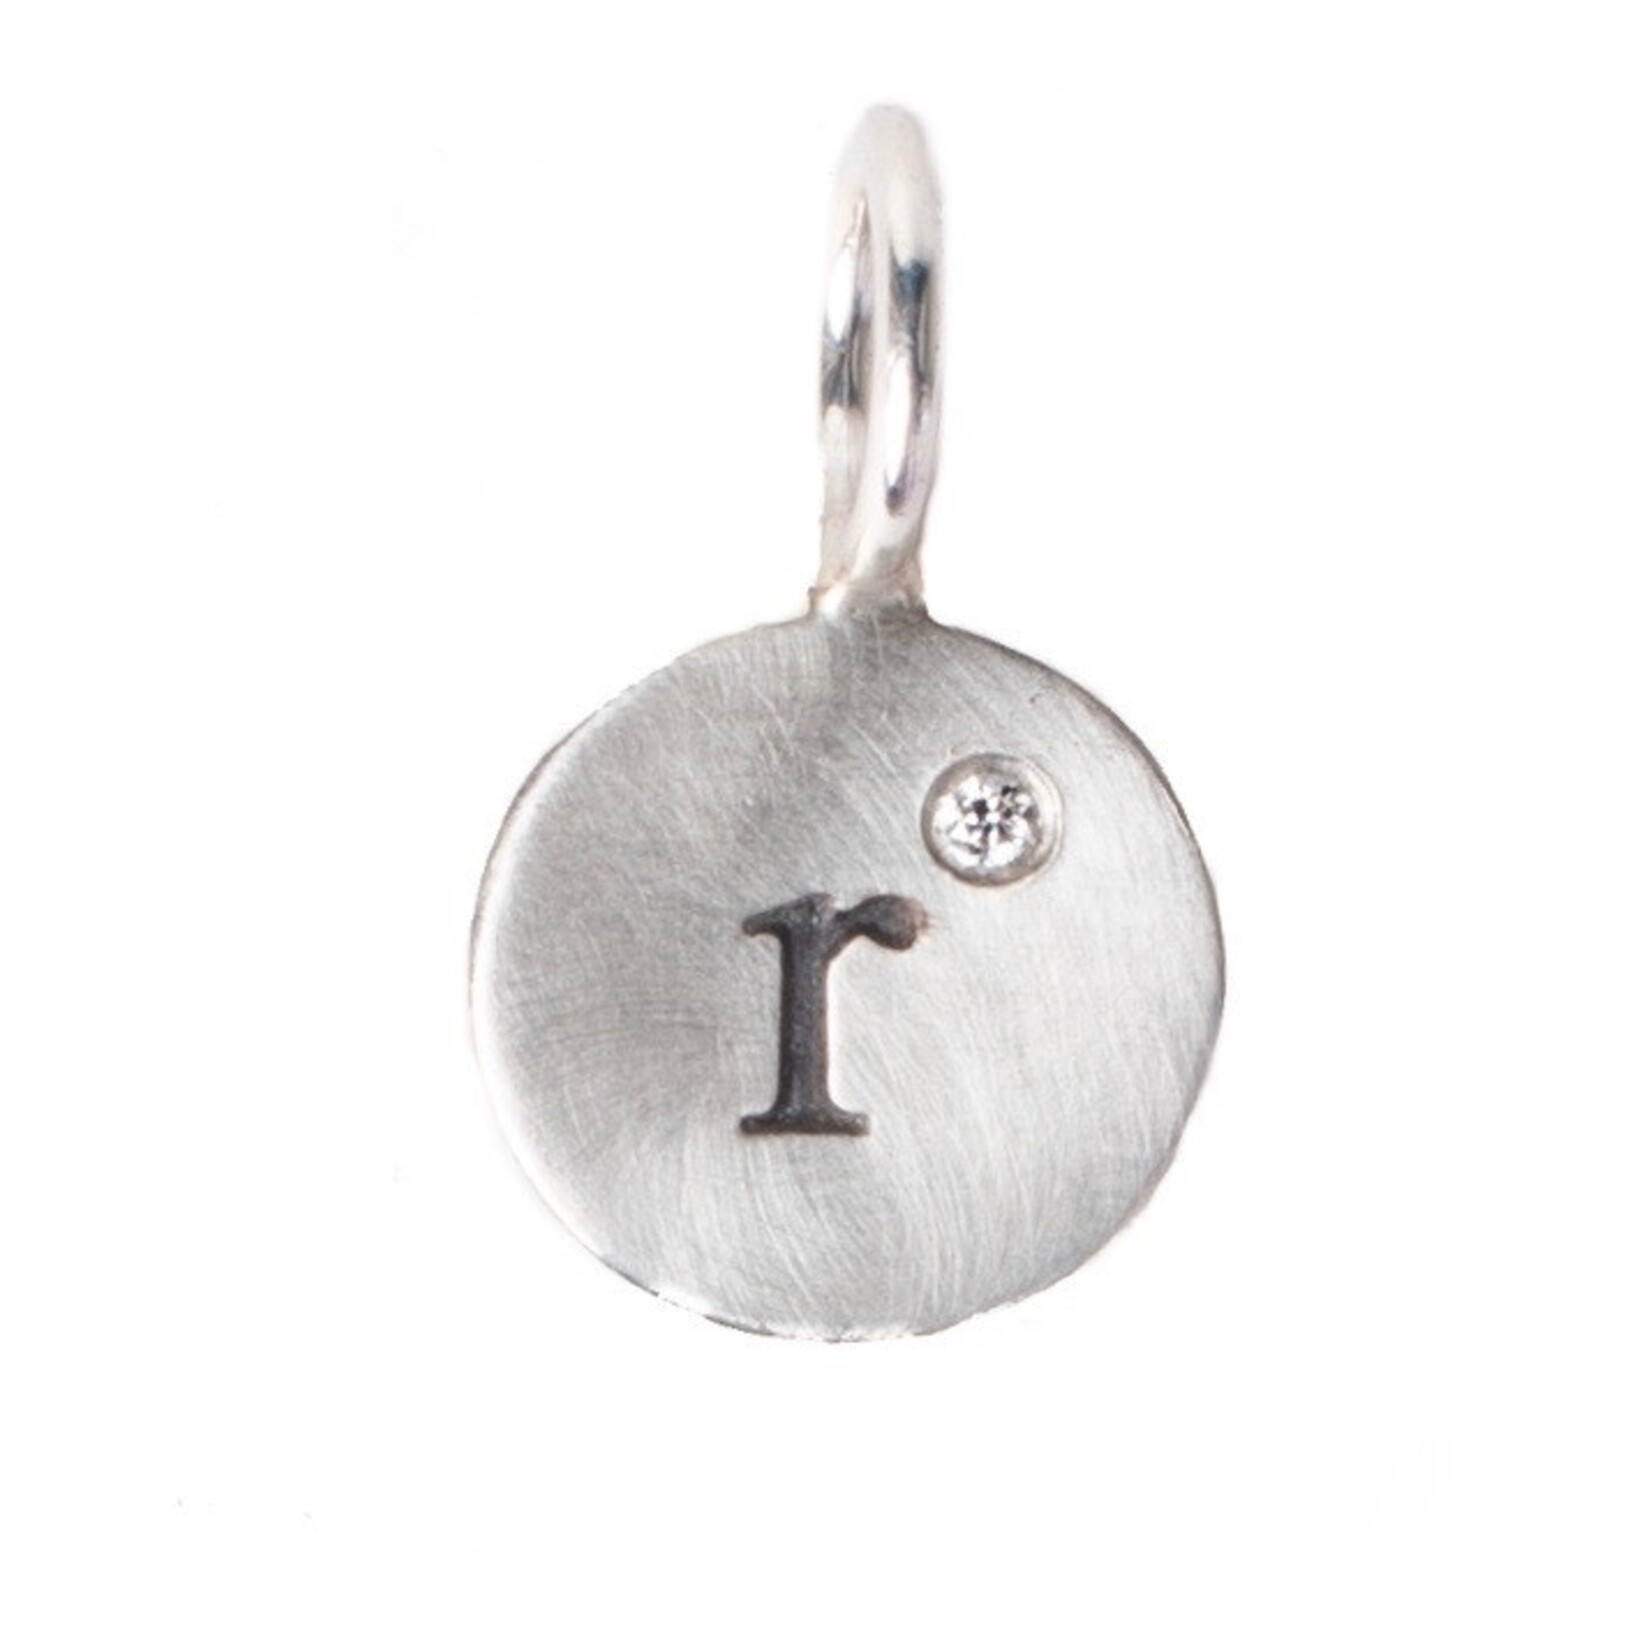 Heather Moore "R" Stamped on Sterling Silver Round (mini) Charm with Diamond